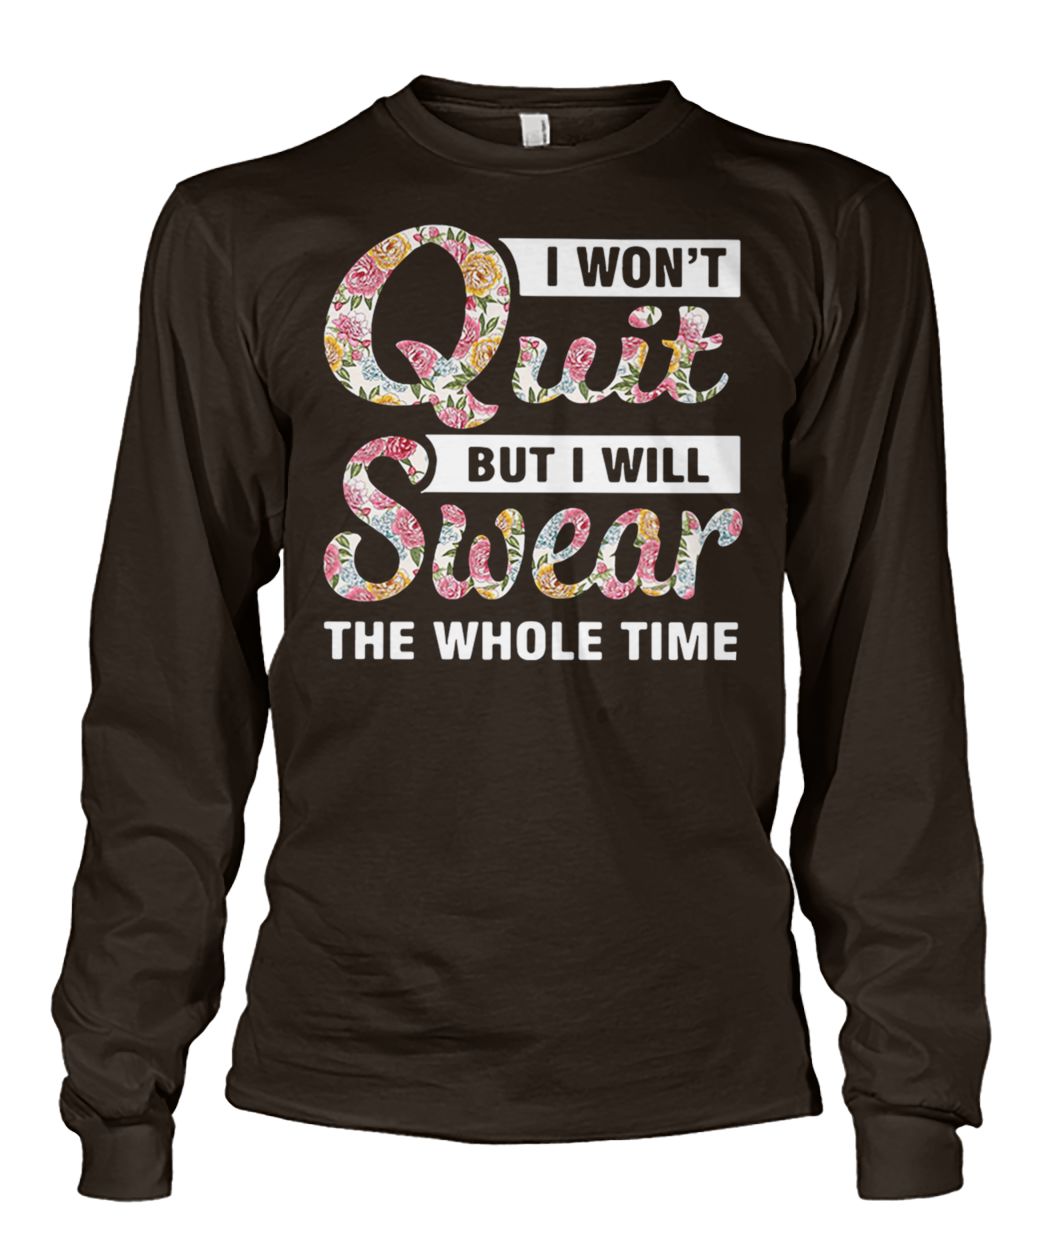 Floral I won't quit but I will swear the whole time unisex long sleeve